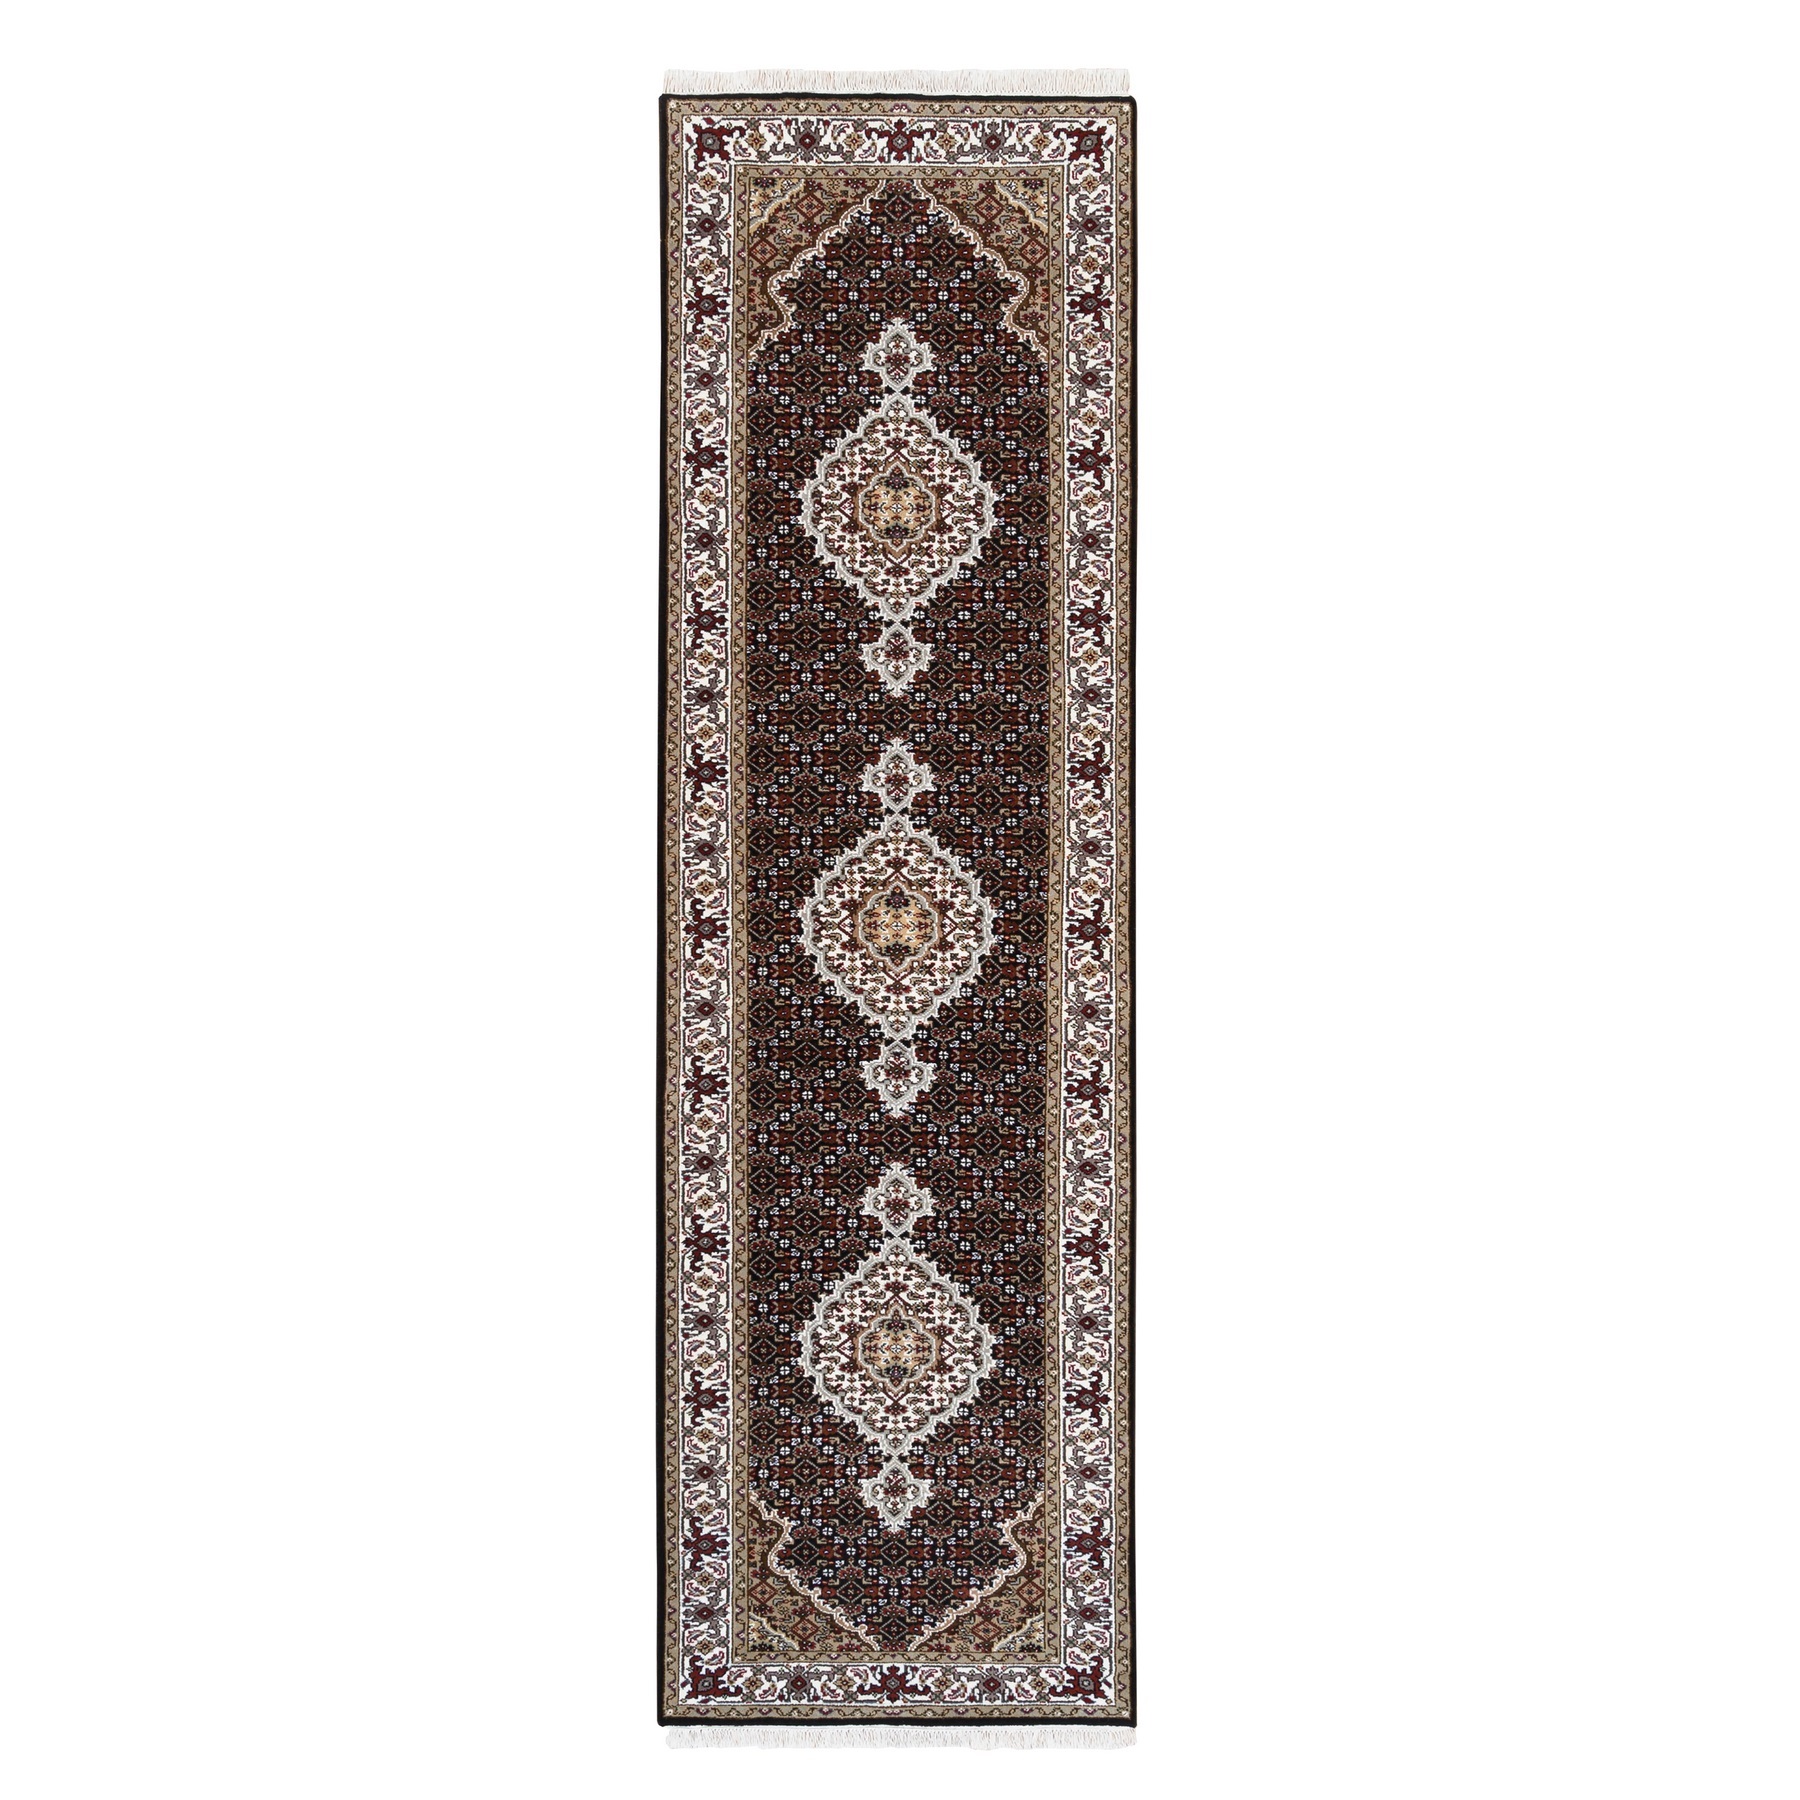 Pirniakan Collection Hand Knotted Black Rug No: 1125006